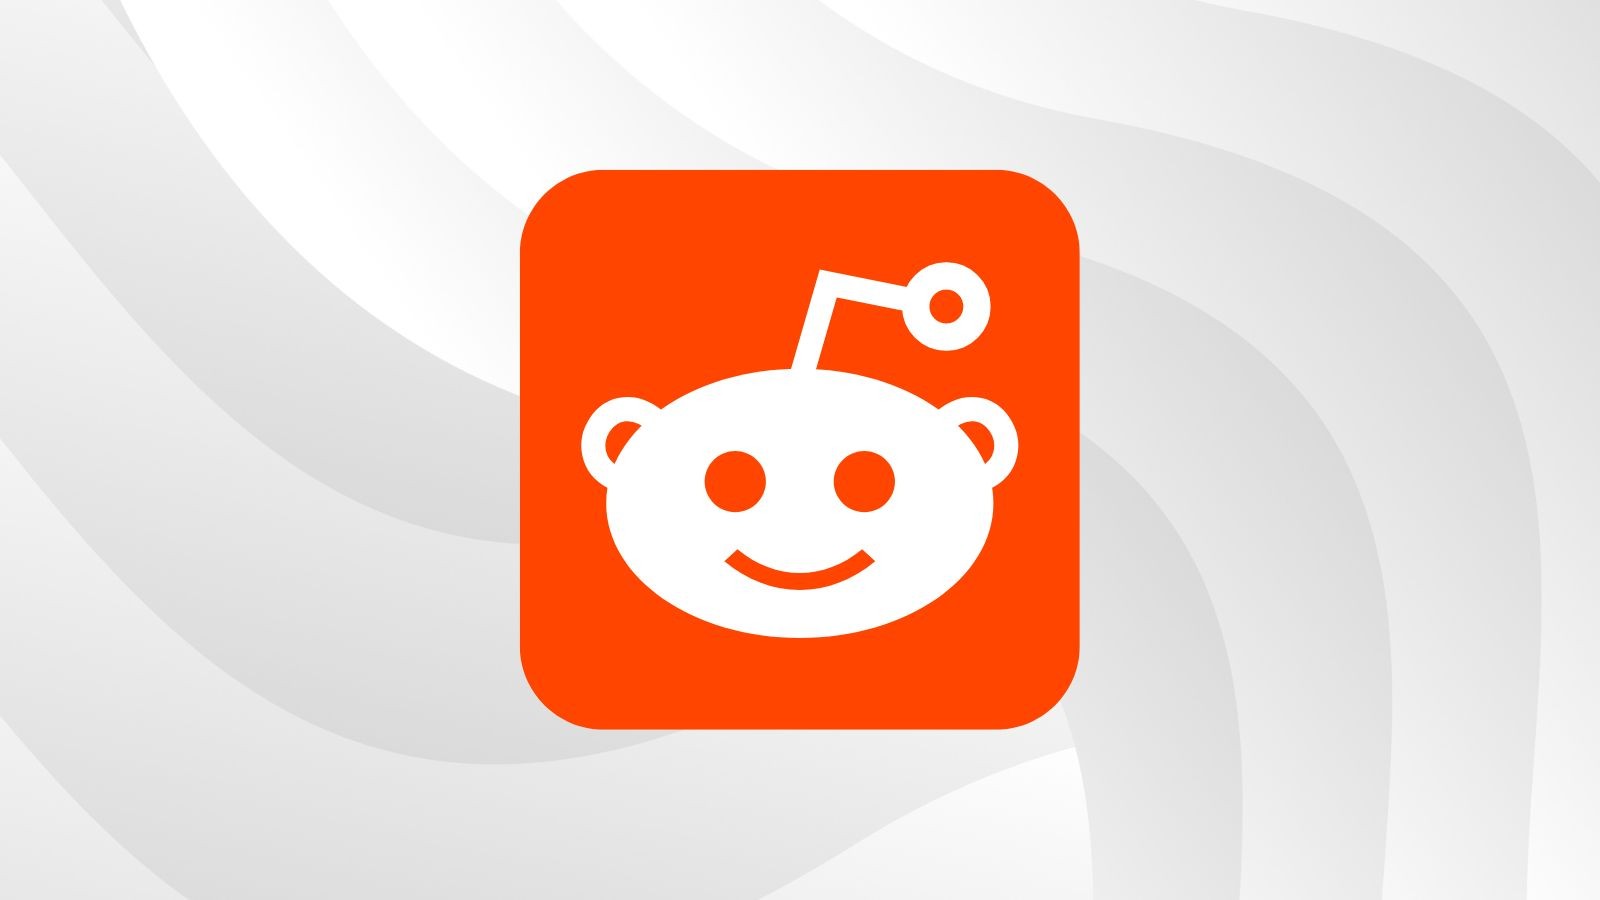 The Power of Reddit: A Guide to Ethically Promoting Your MVP and Engaging with Users for Feedback